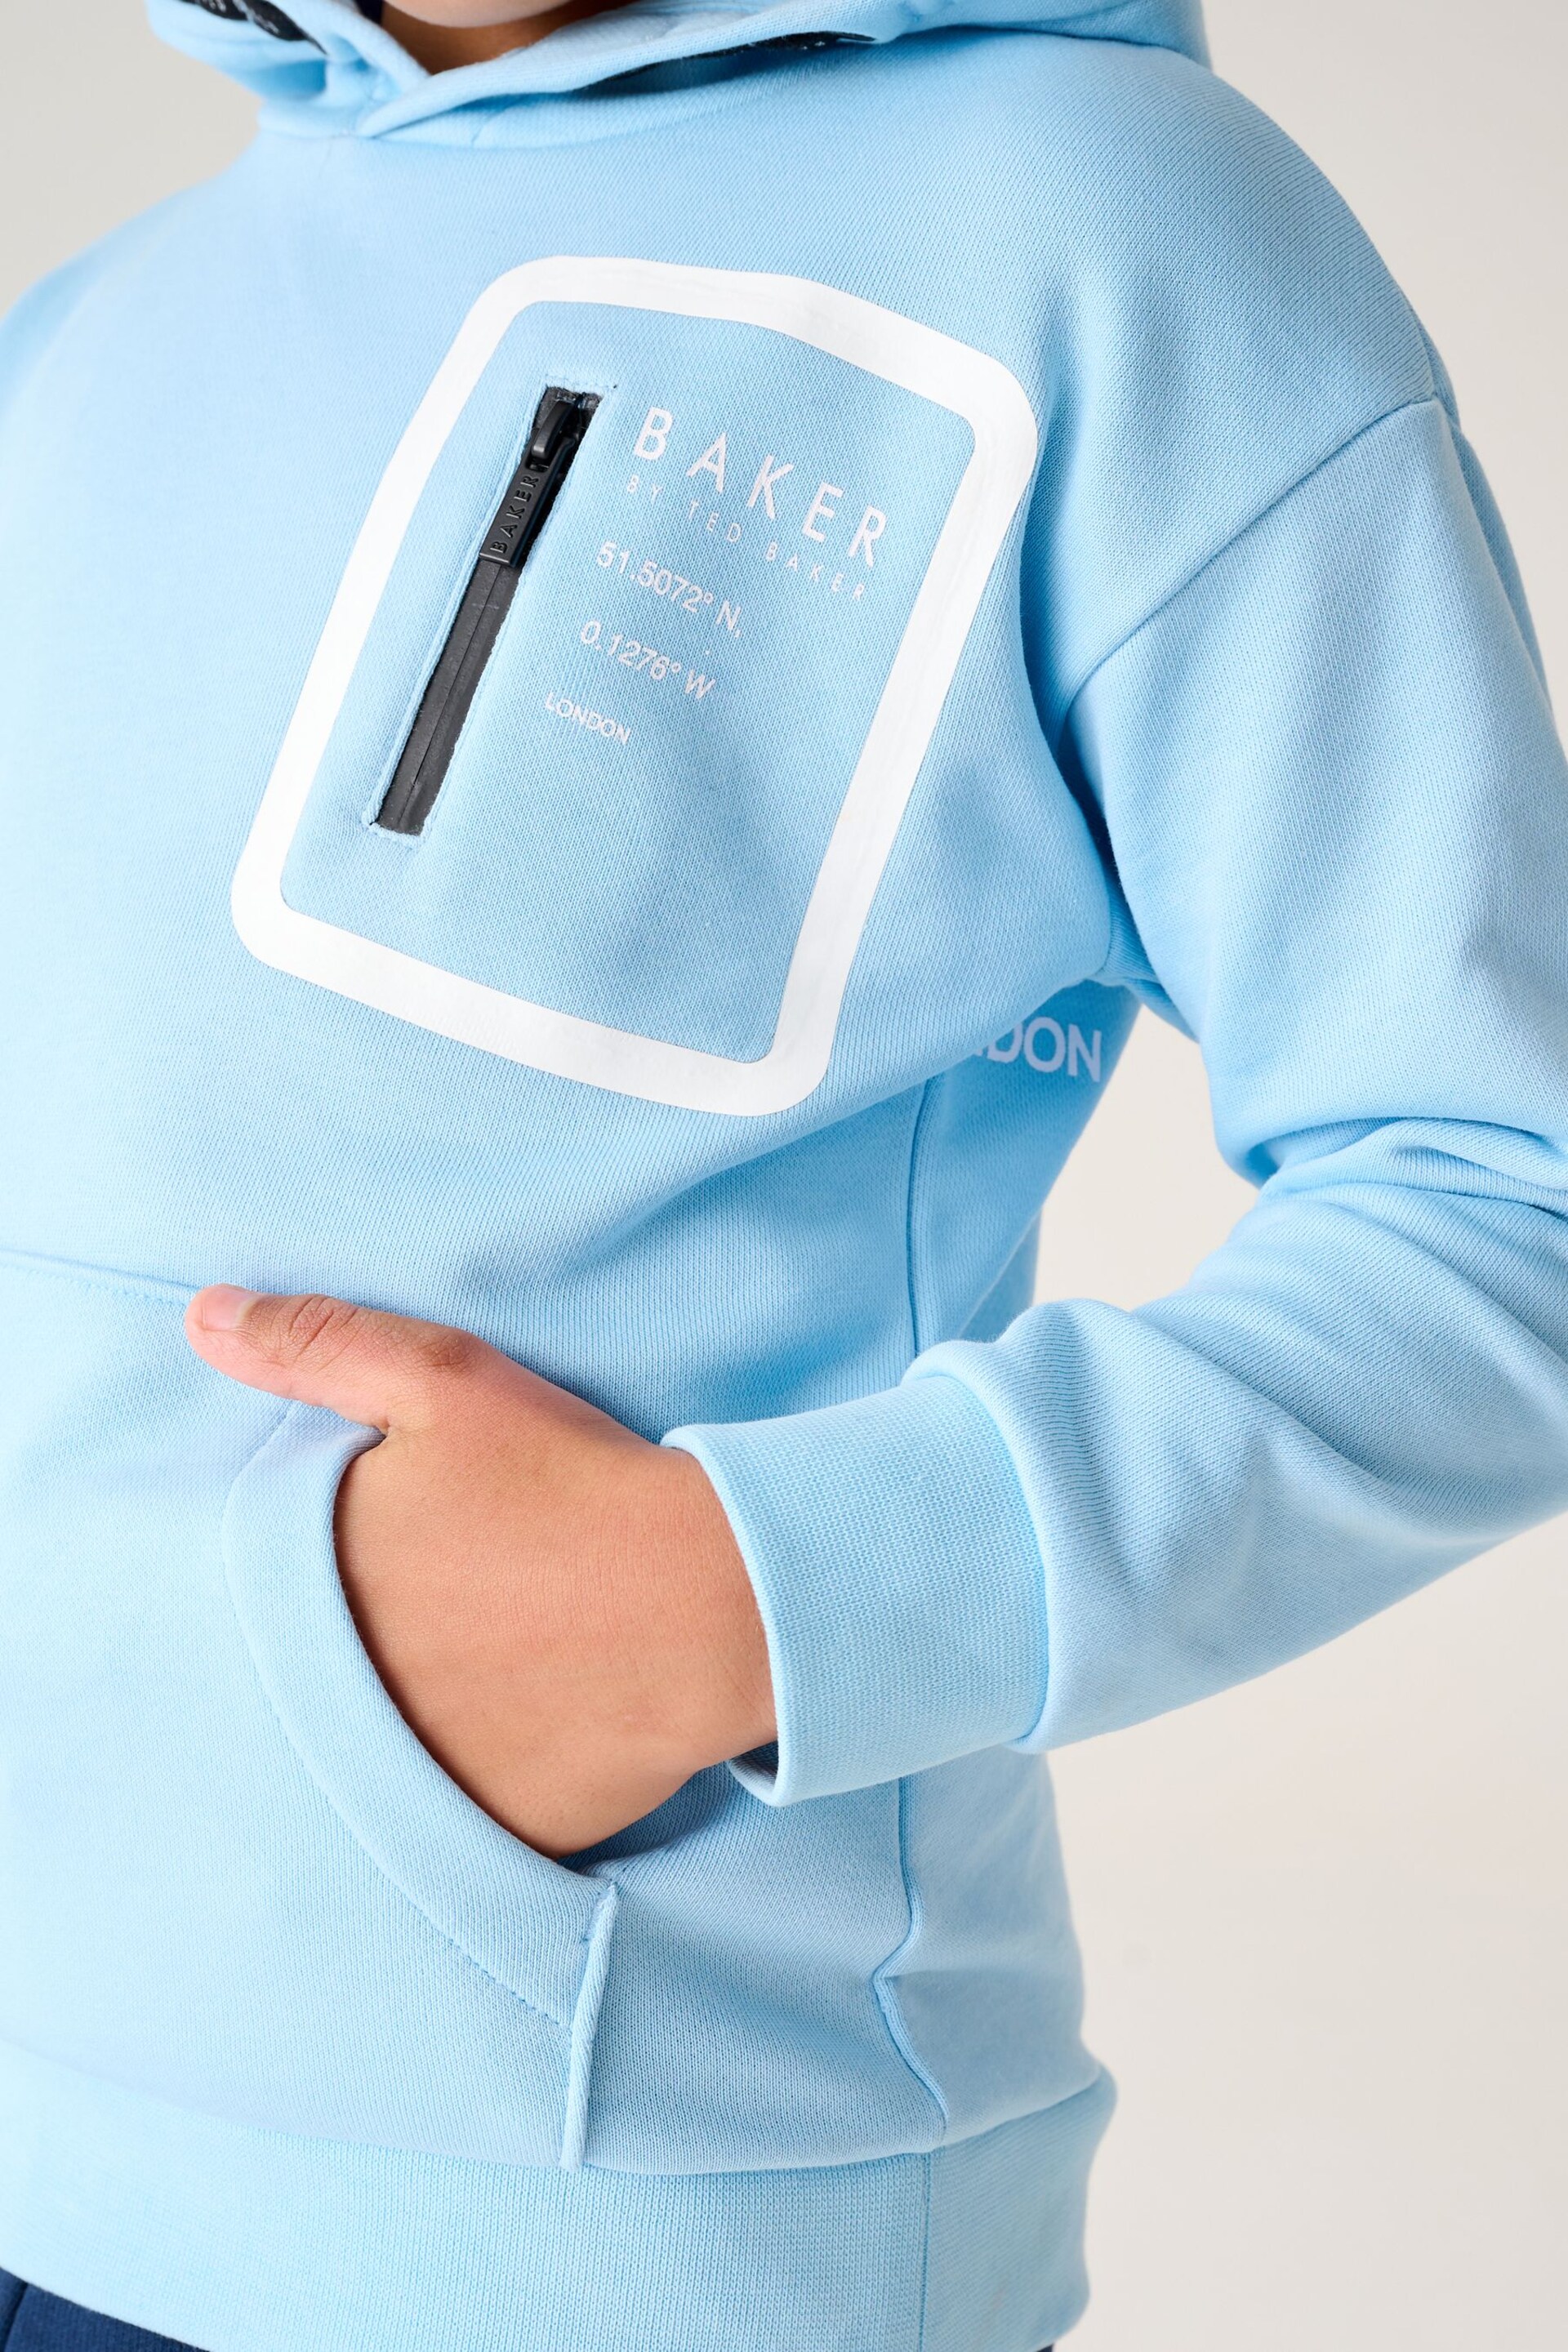 Baker by Ted Baker Graphic Hoodie - Image 4 of 9